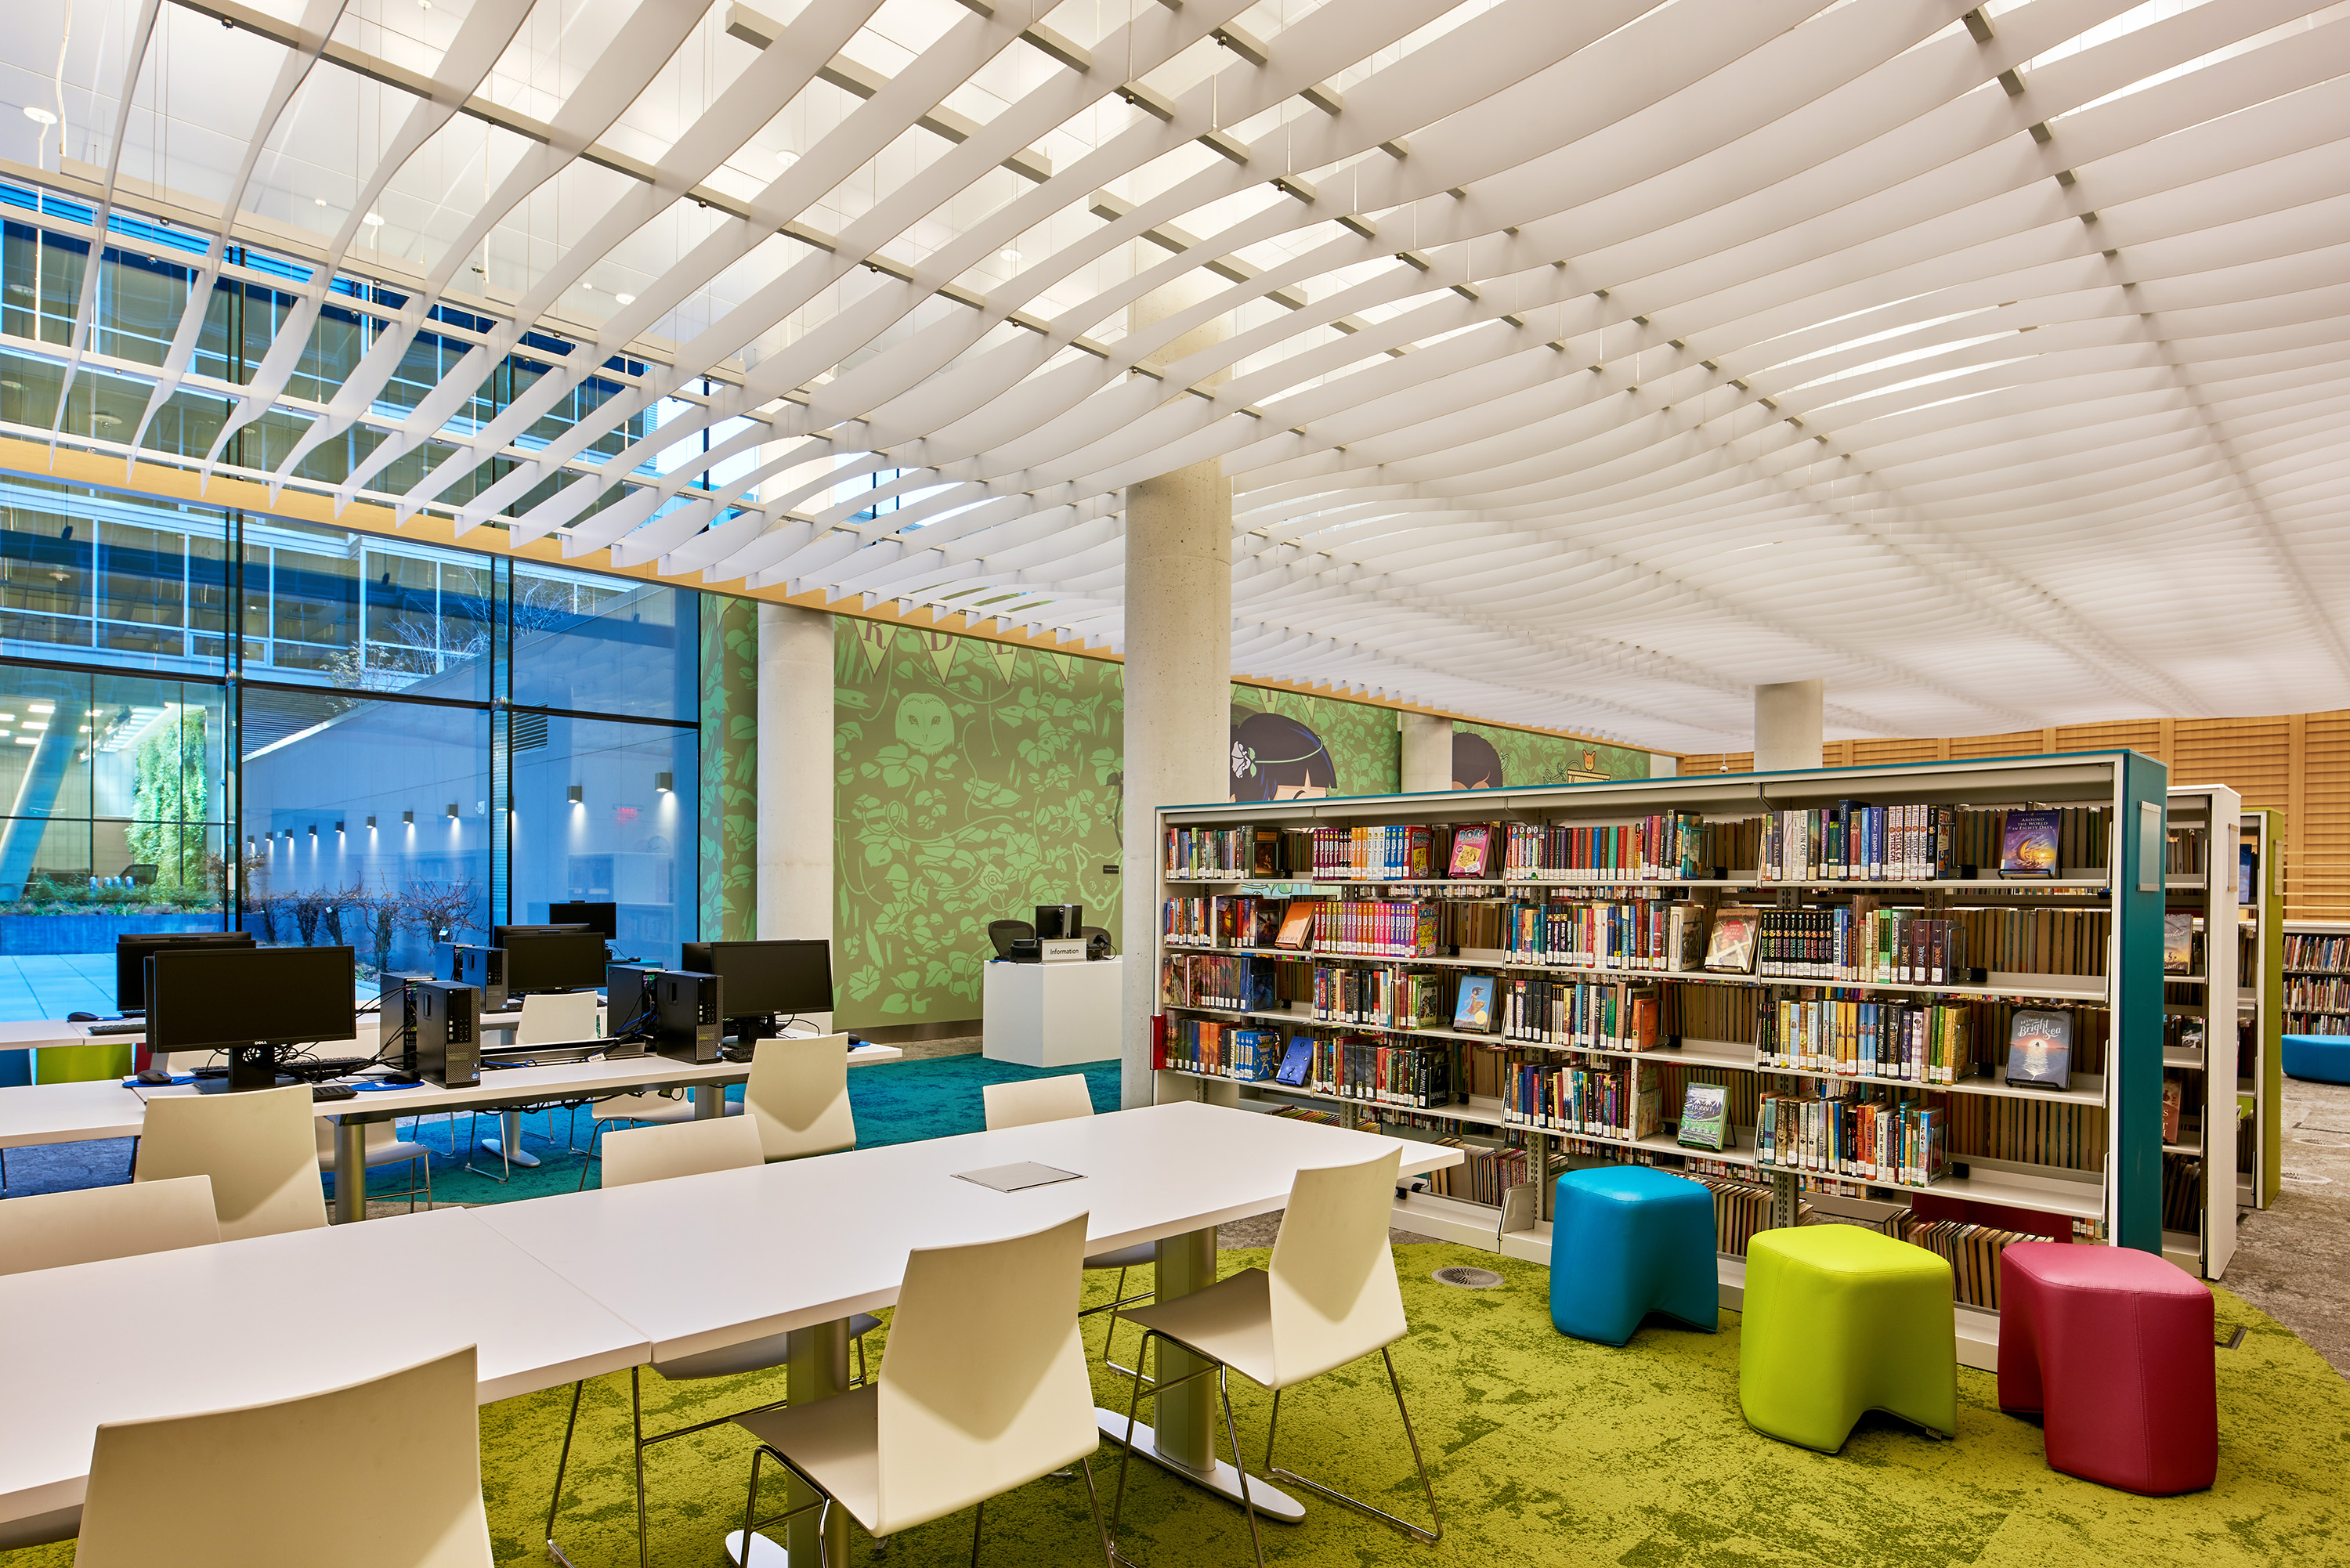 The library interior is an airy, bright and inspiring modern space.